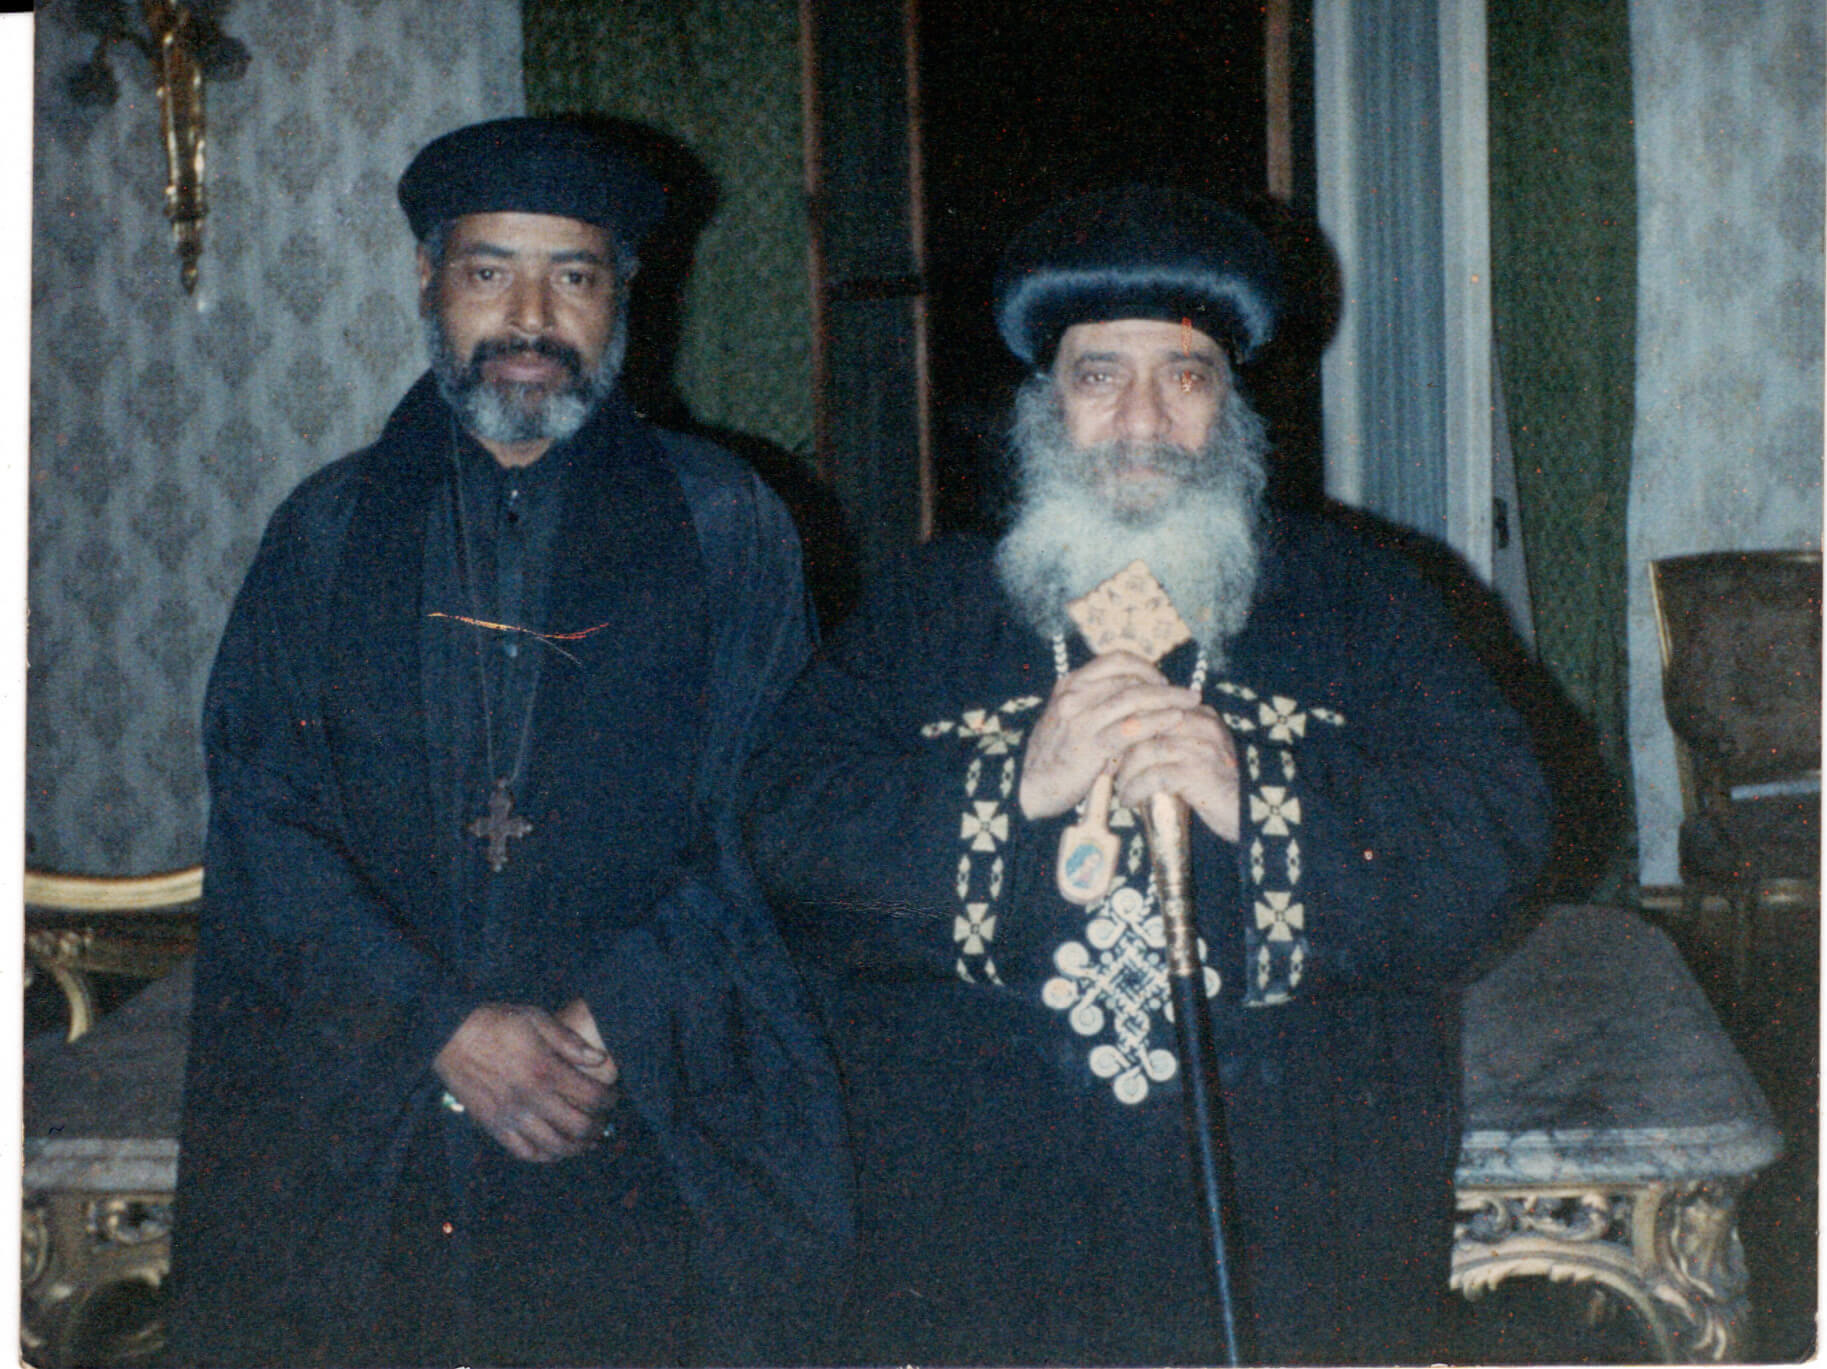 Pope Shenouda III was the 117th Pope of Alexandria and Patriarch of the See of St. Mark